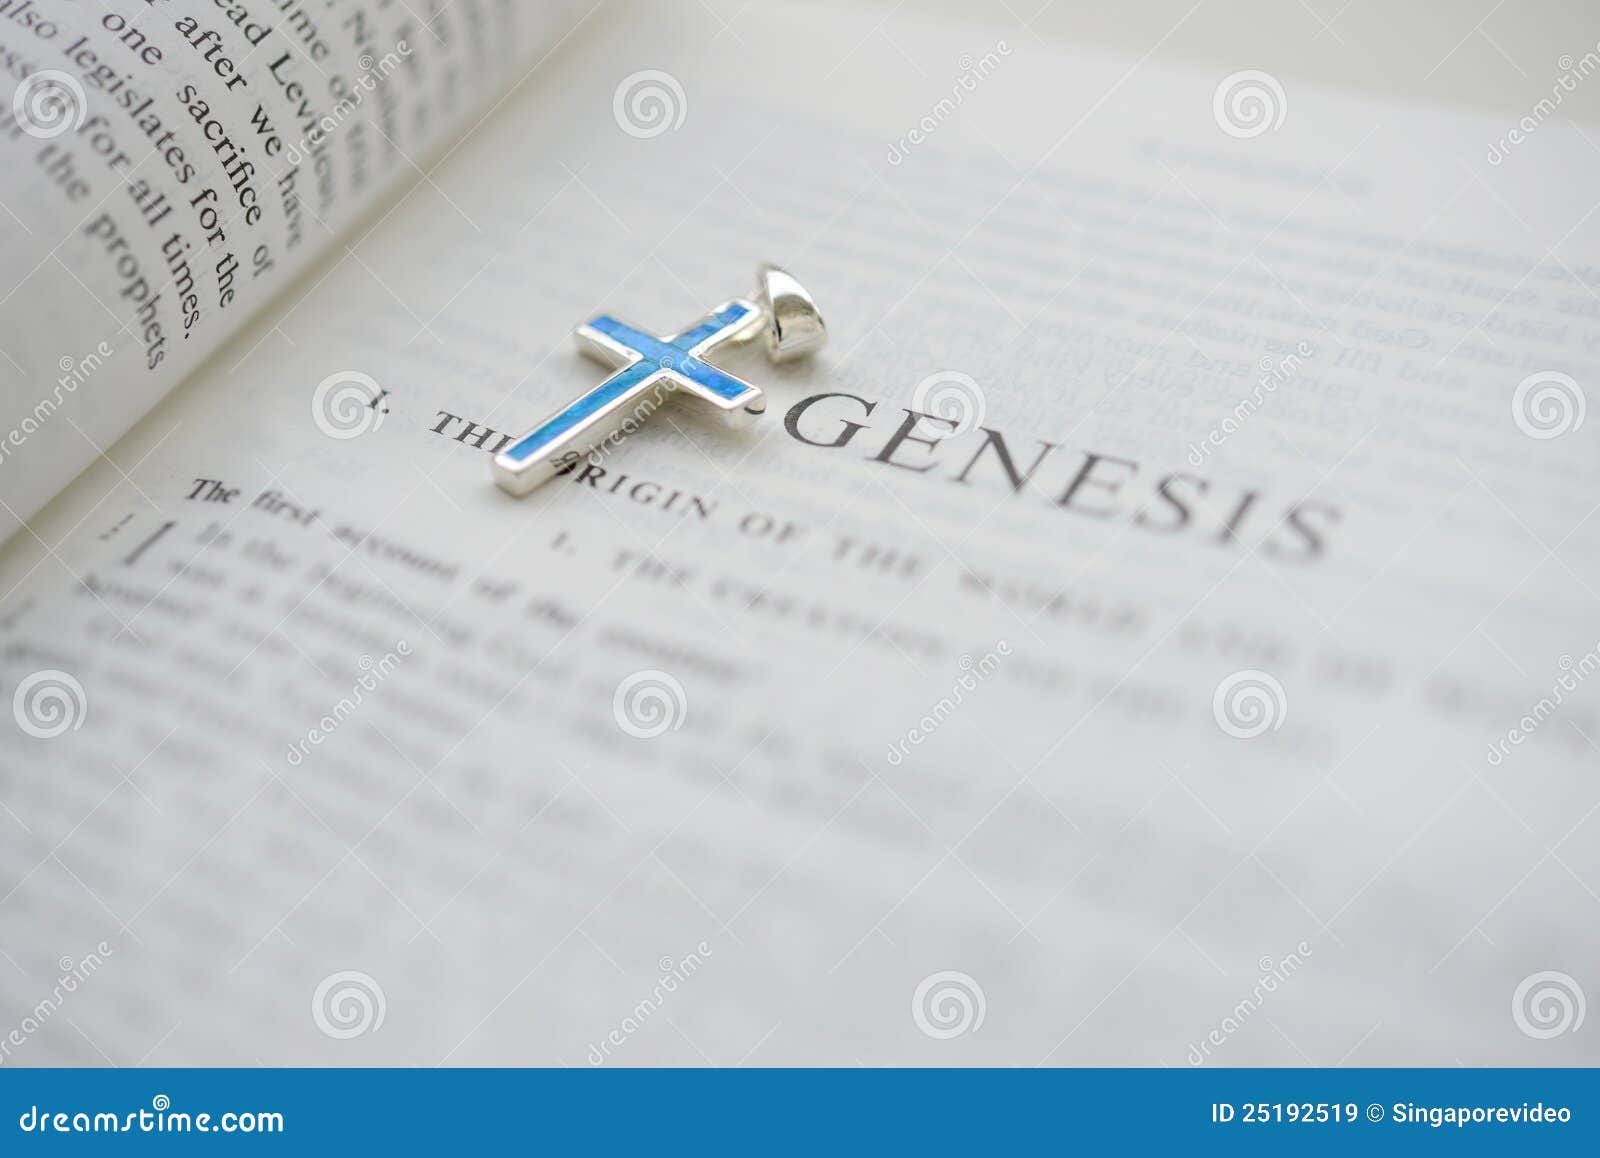 cruxific close to the word genesis on the bible